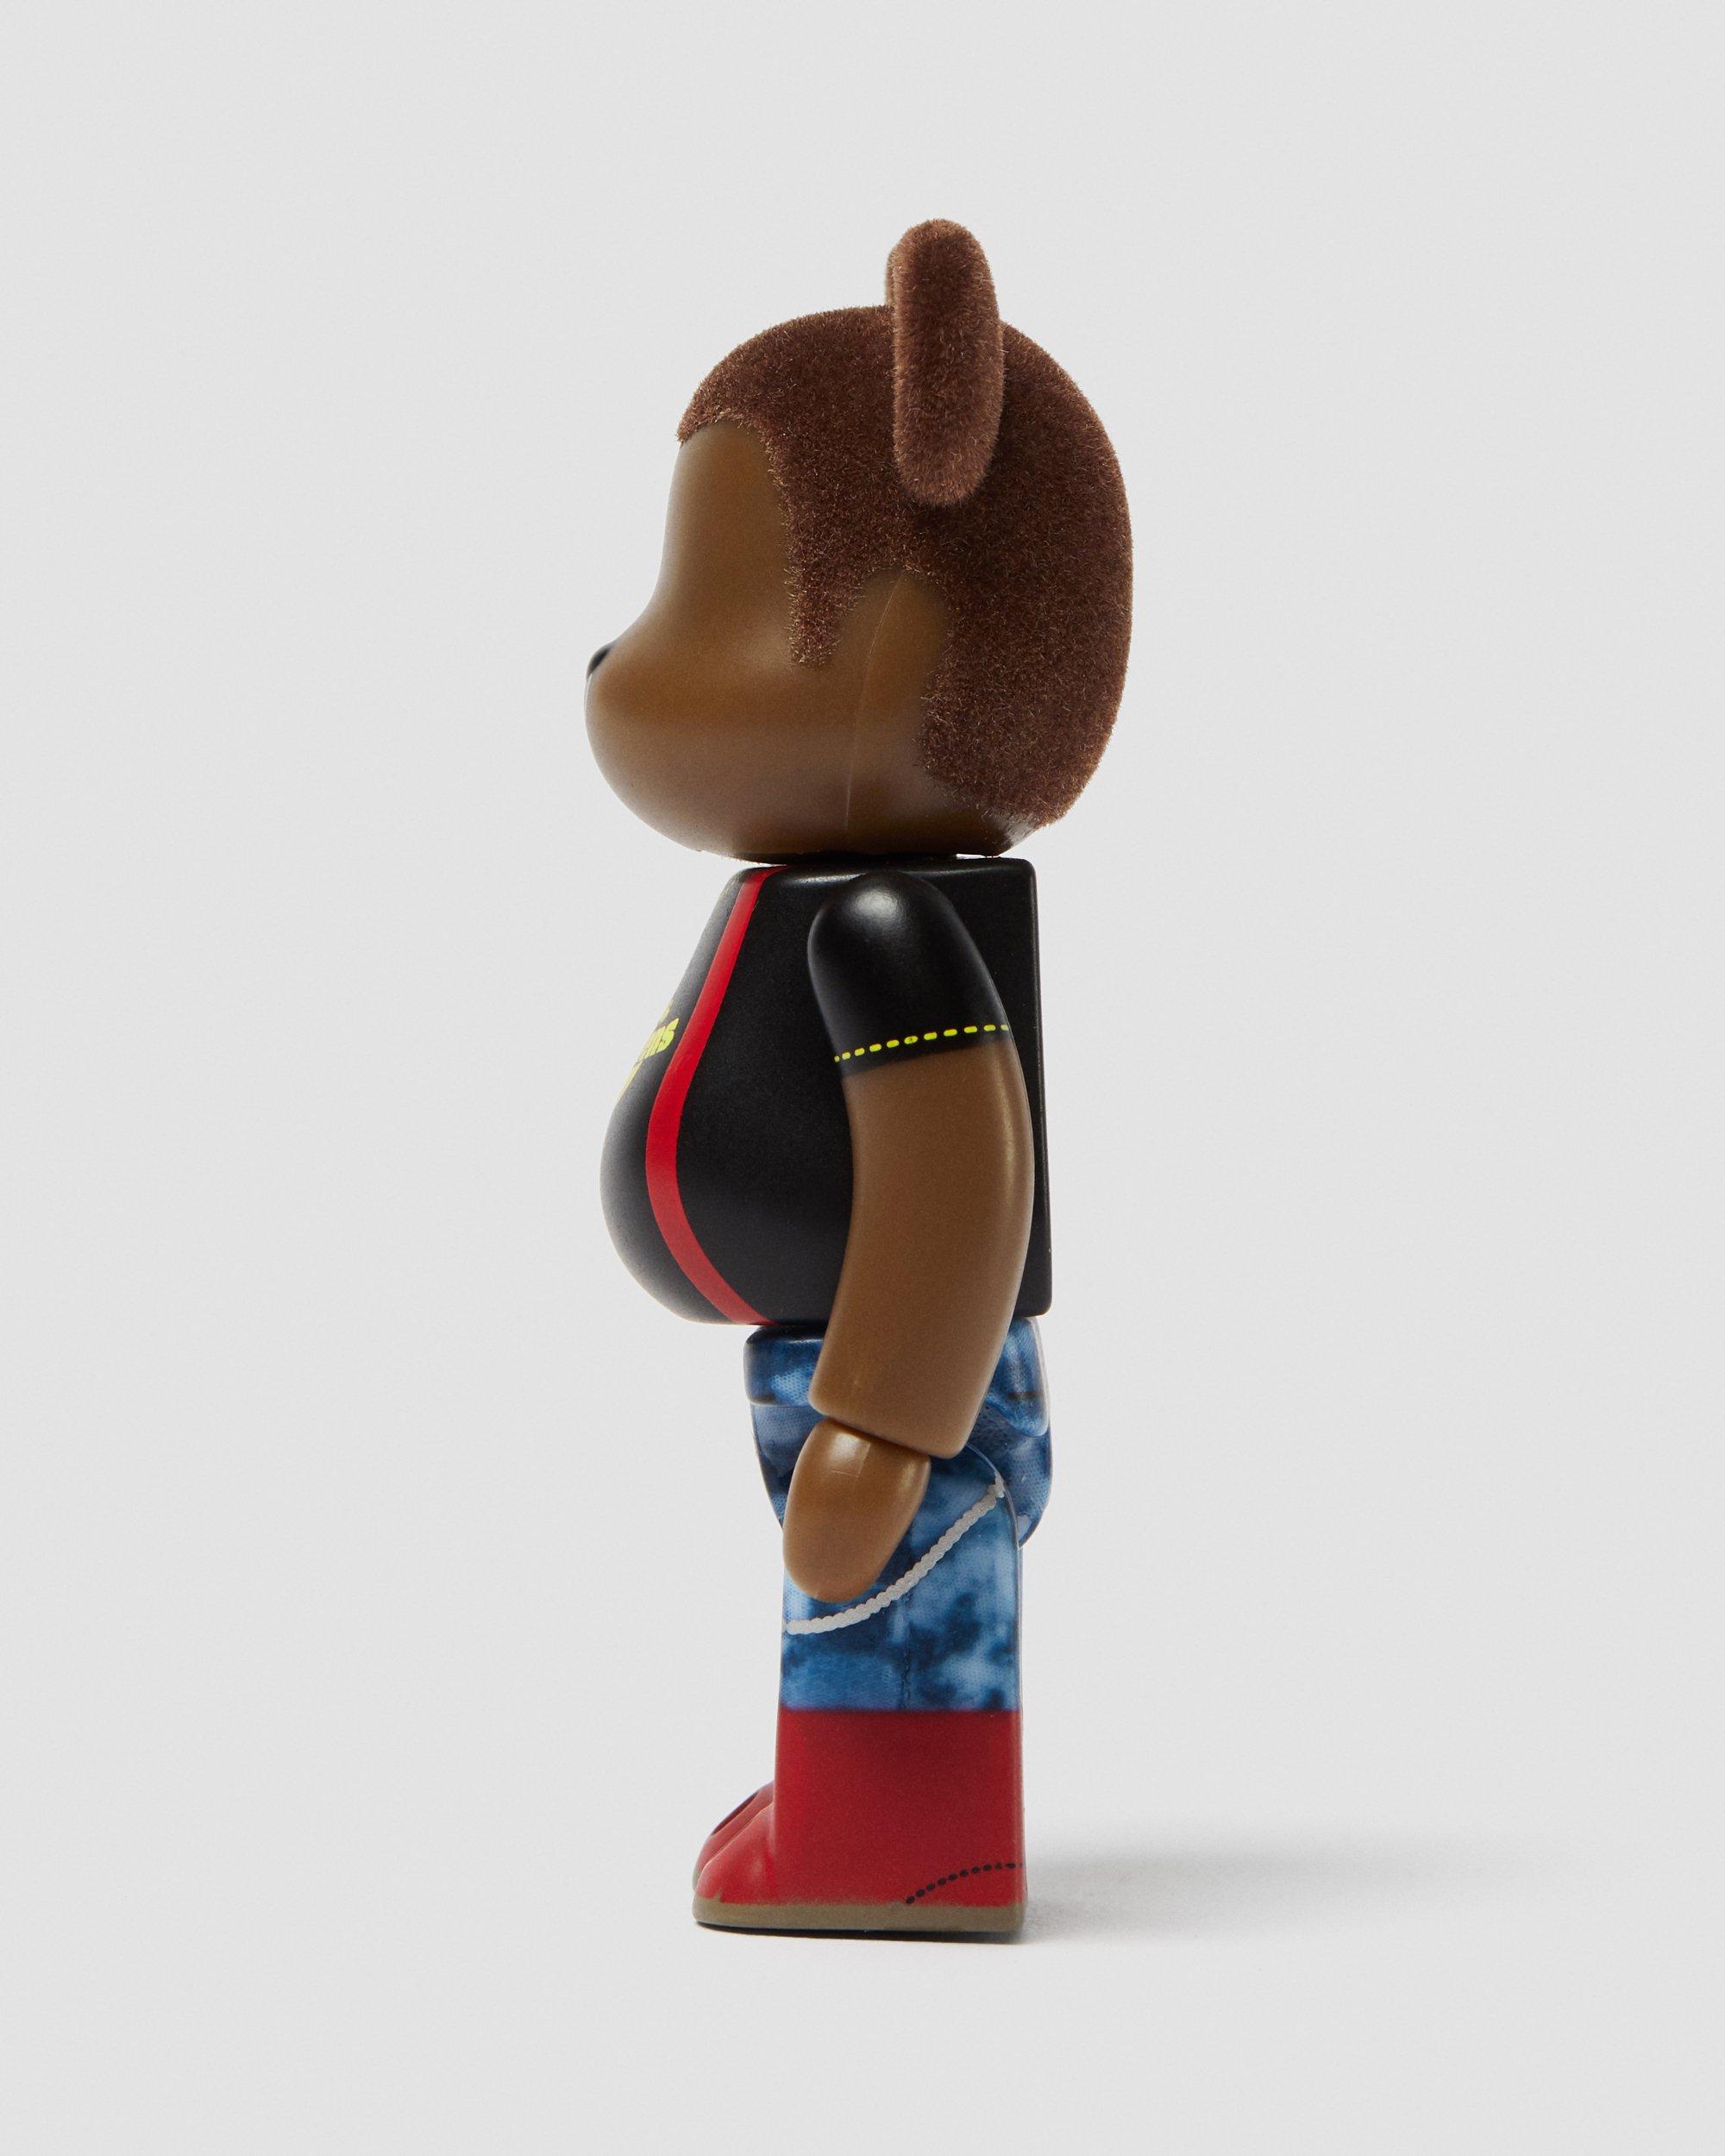 ACTION FIGURE BE@RBRICK ANNI '60ACTION FIGURE BE@RBRICK Dr. Martens